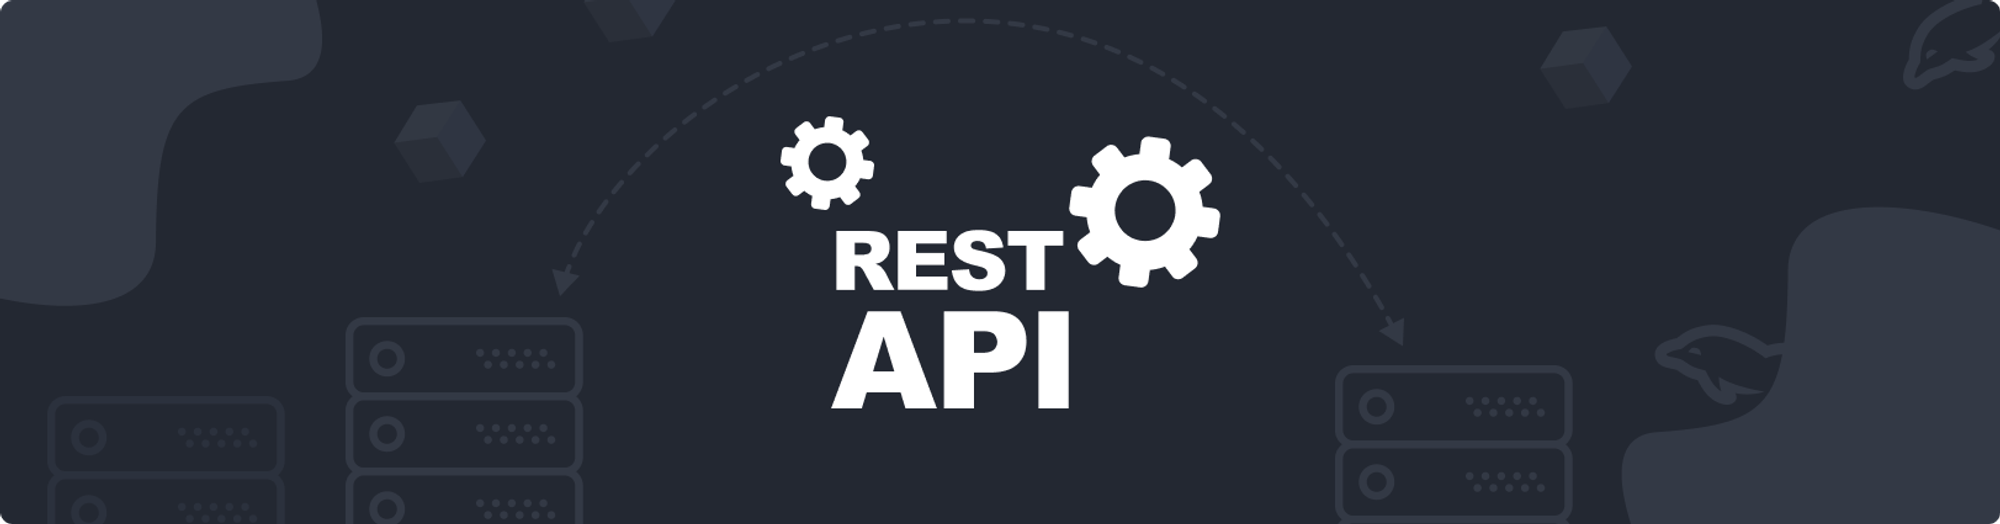 REST API: A Practical Guide to Creating APIs the Right Way